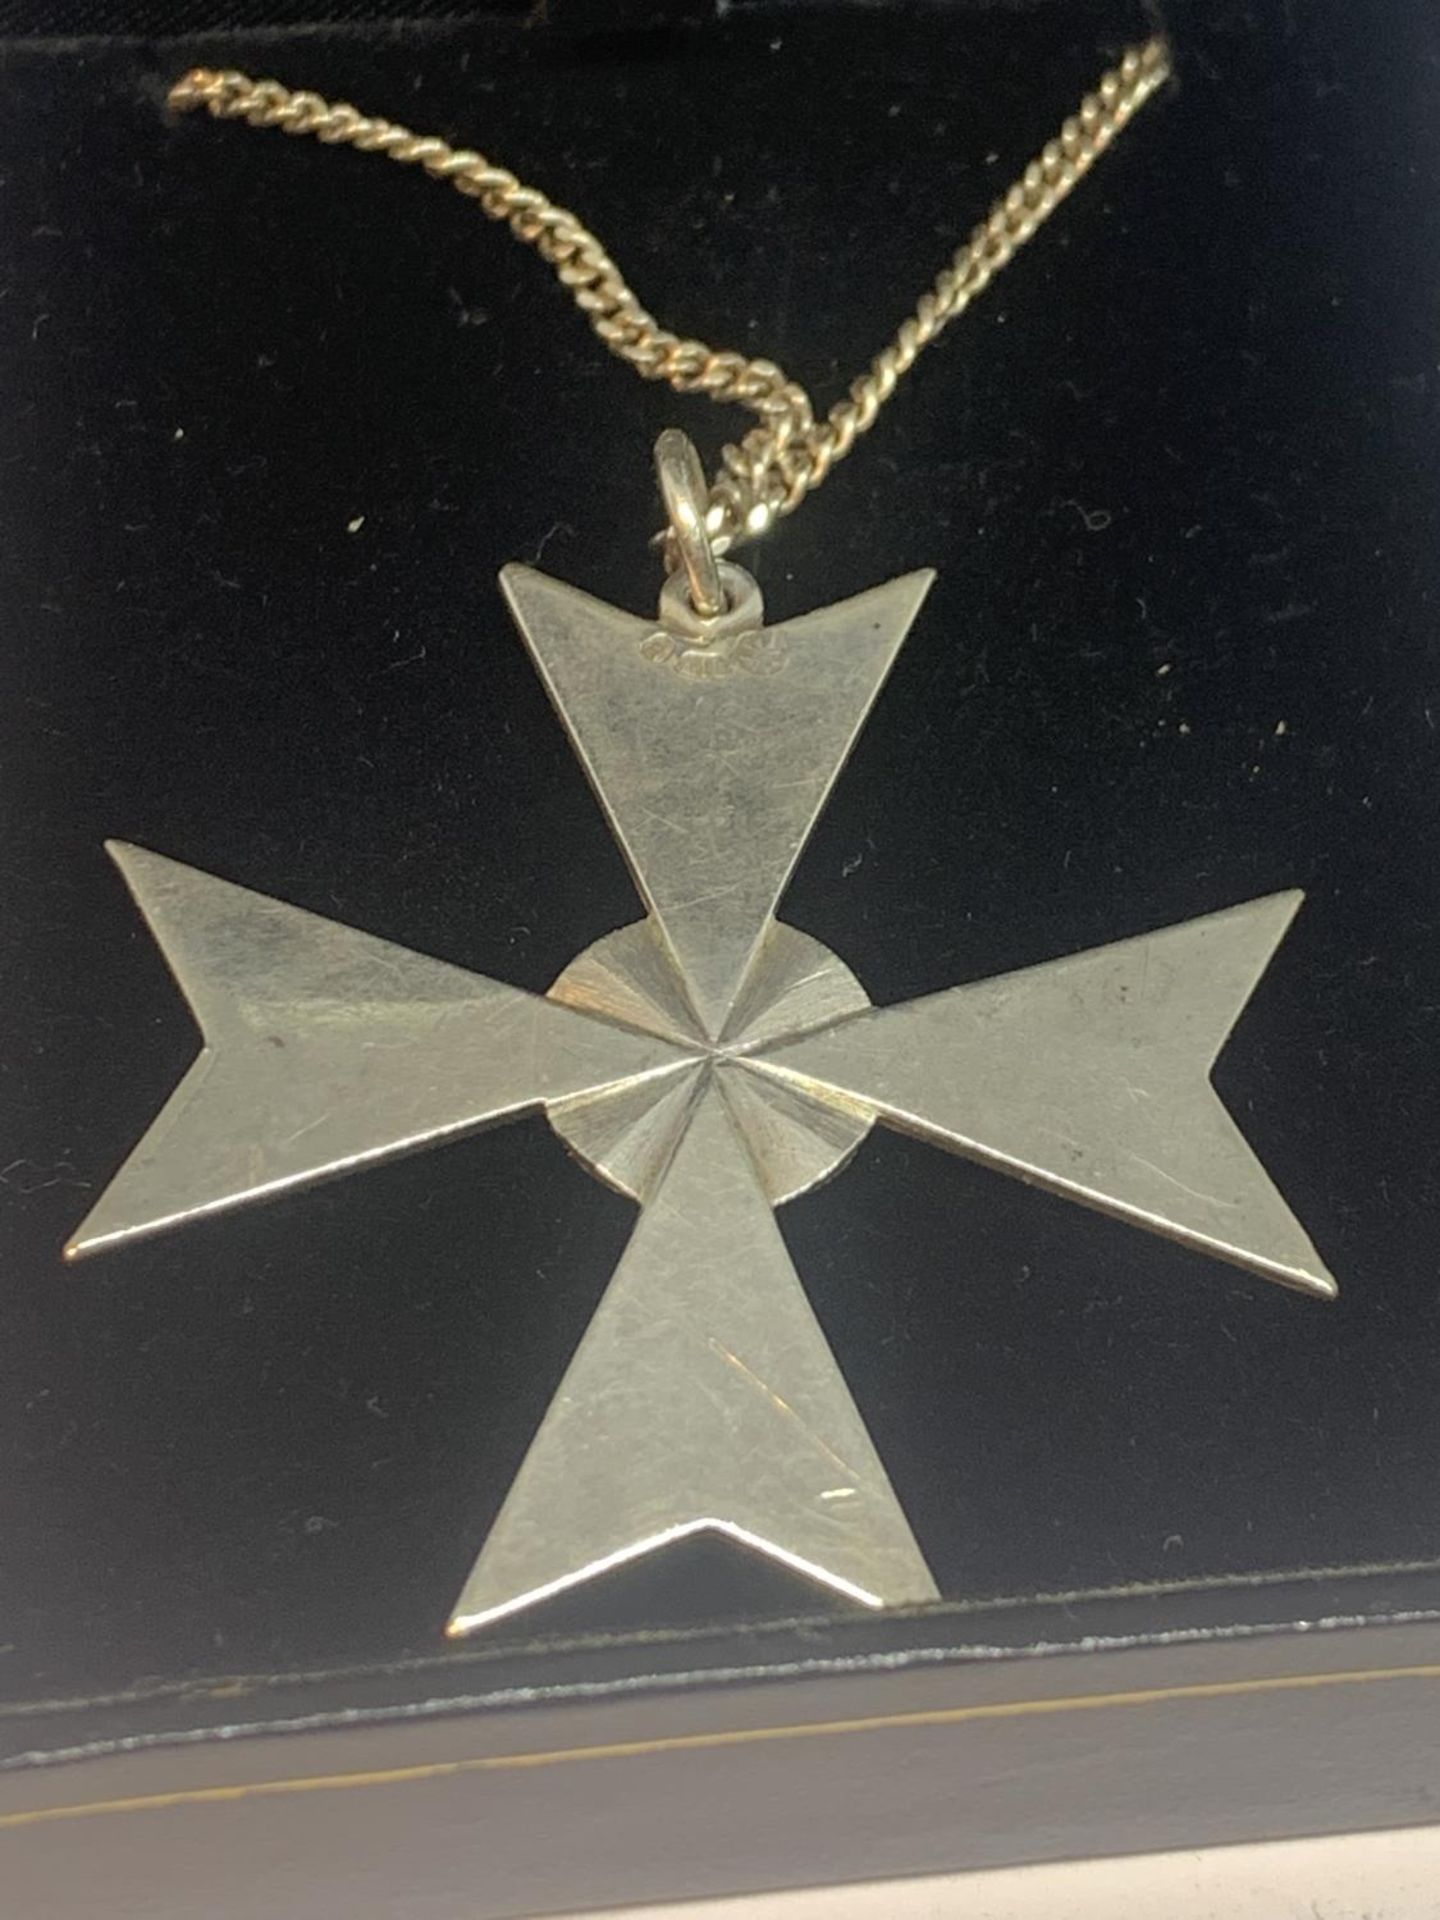 A LARGE SILVER MALTESE CROSS PENDANT ON A SILVER CHAIN LENGTH 28 INCHES IN A PRESENTATION BOX - Image 2 of 3